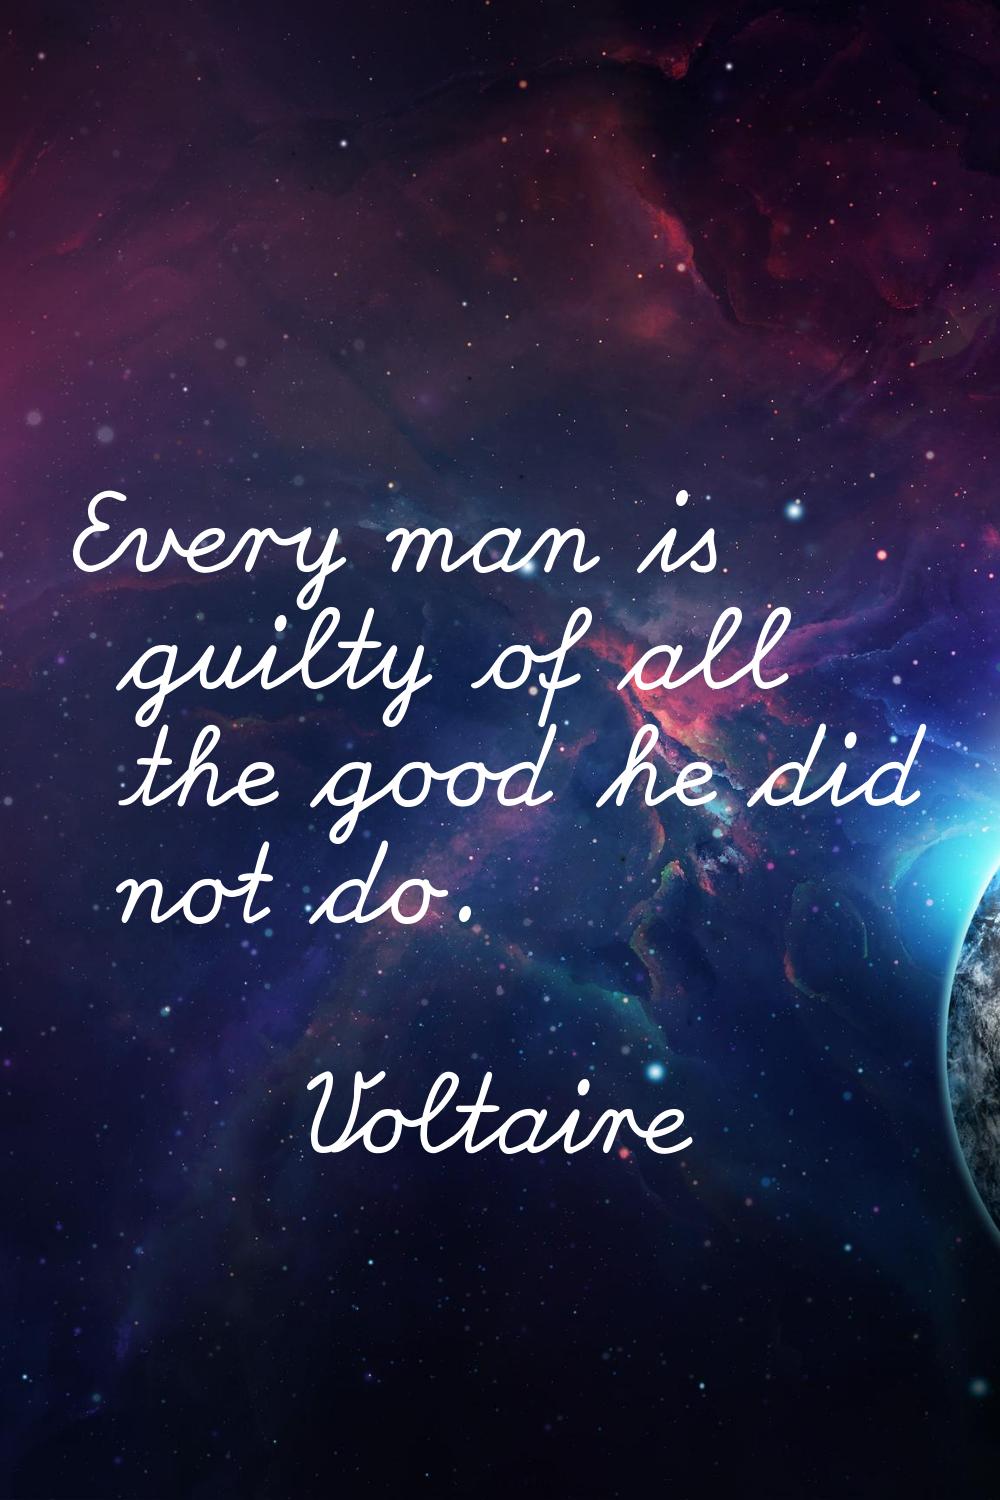 Every man is guilty of all the good he did not do.